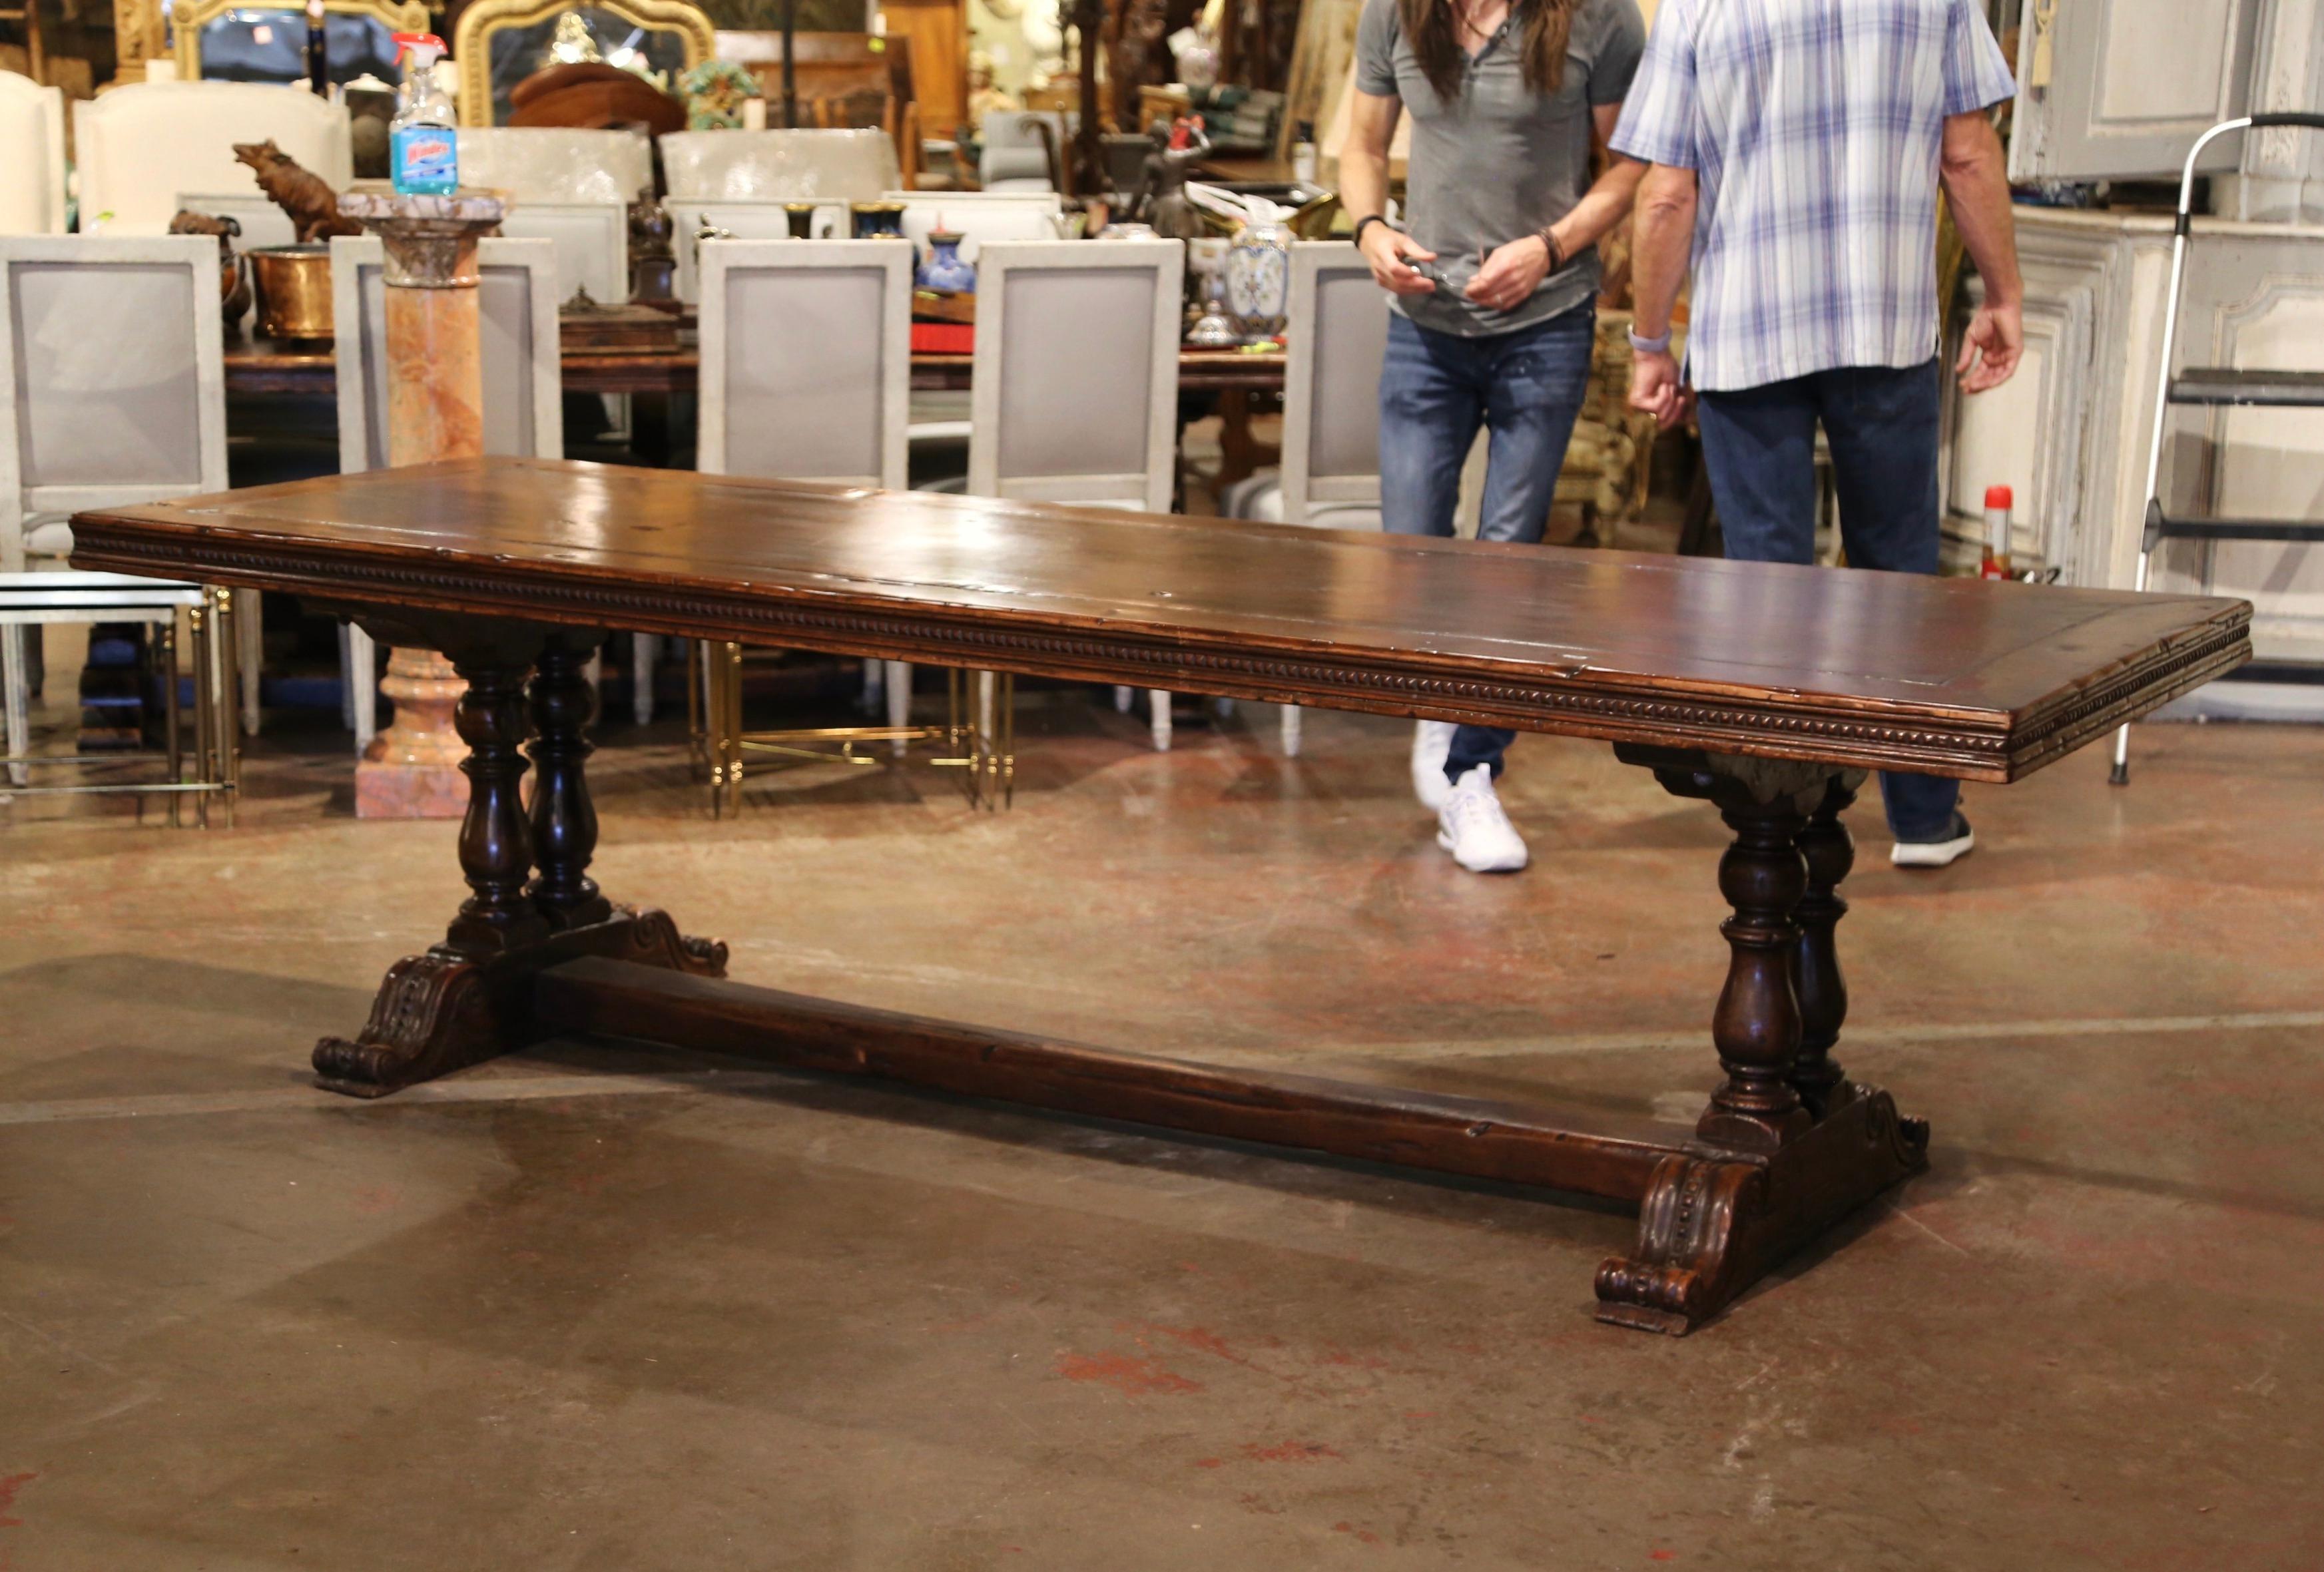 This large antique dining room table was crafted in southwest France, near the Spanish and French border. Built with 18th century walnut timber, the 9 foot table stands on two hand carved baluster legs ending with shoe base, and connected with a